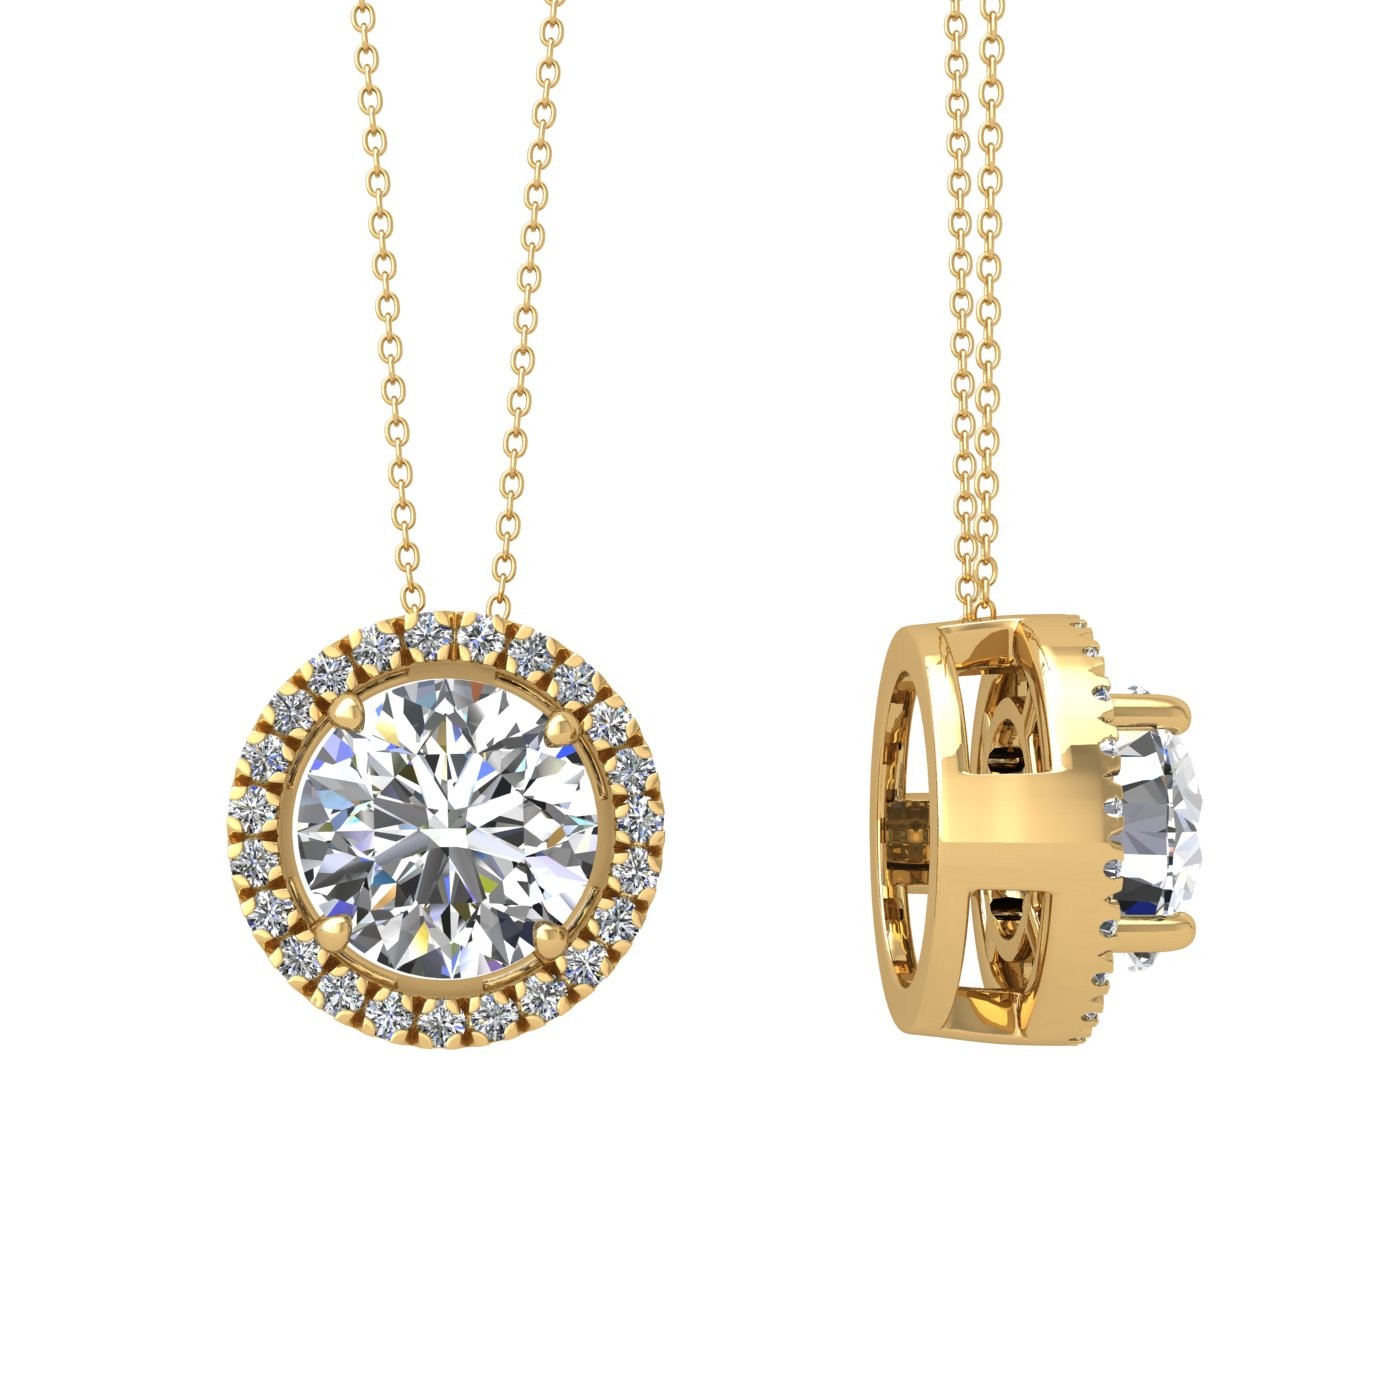 18k yellow gold 0,3 ct 4 prong round shape diamond pendant with diamond pavÉ set halo including chain seperate from the pendant Photos & images